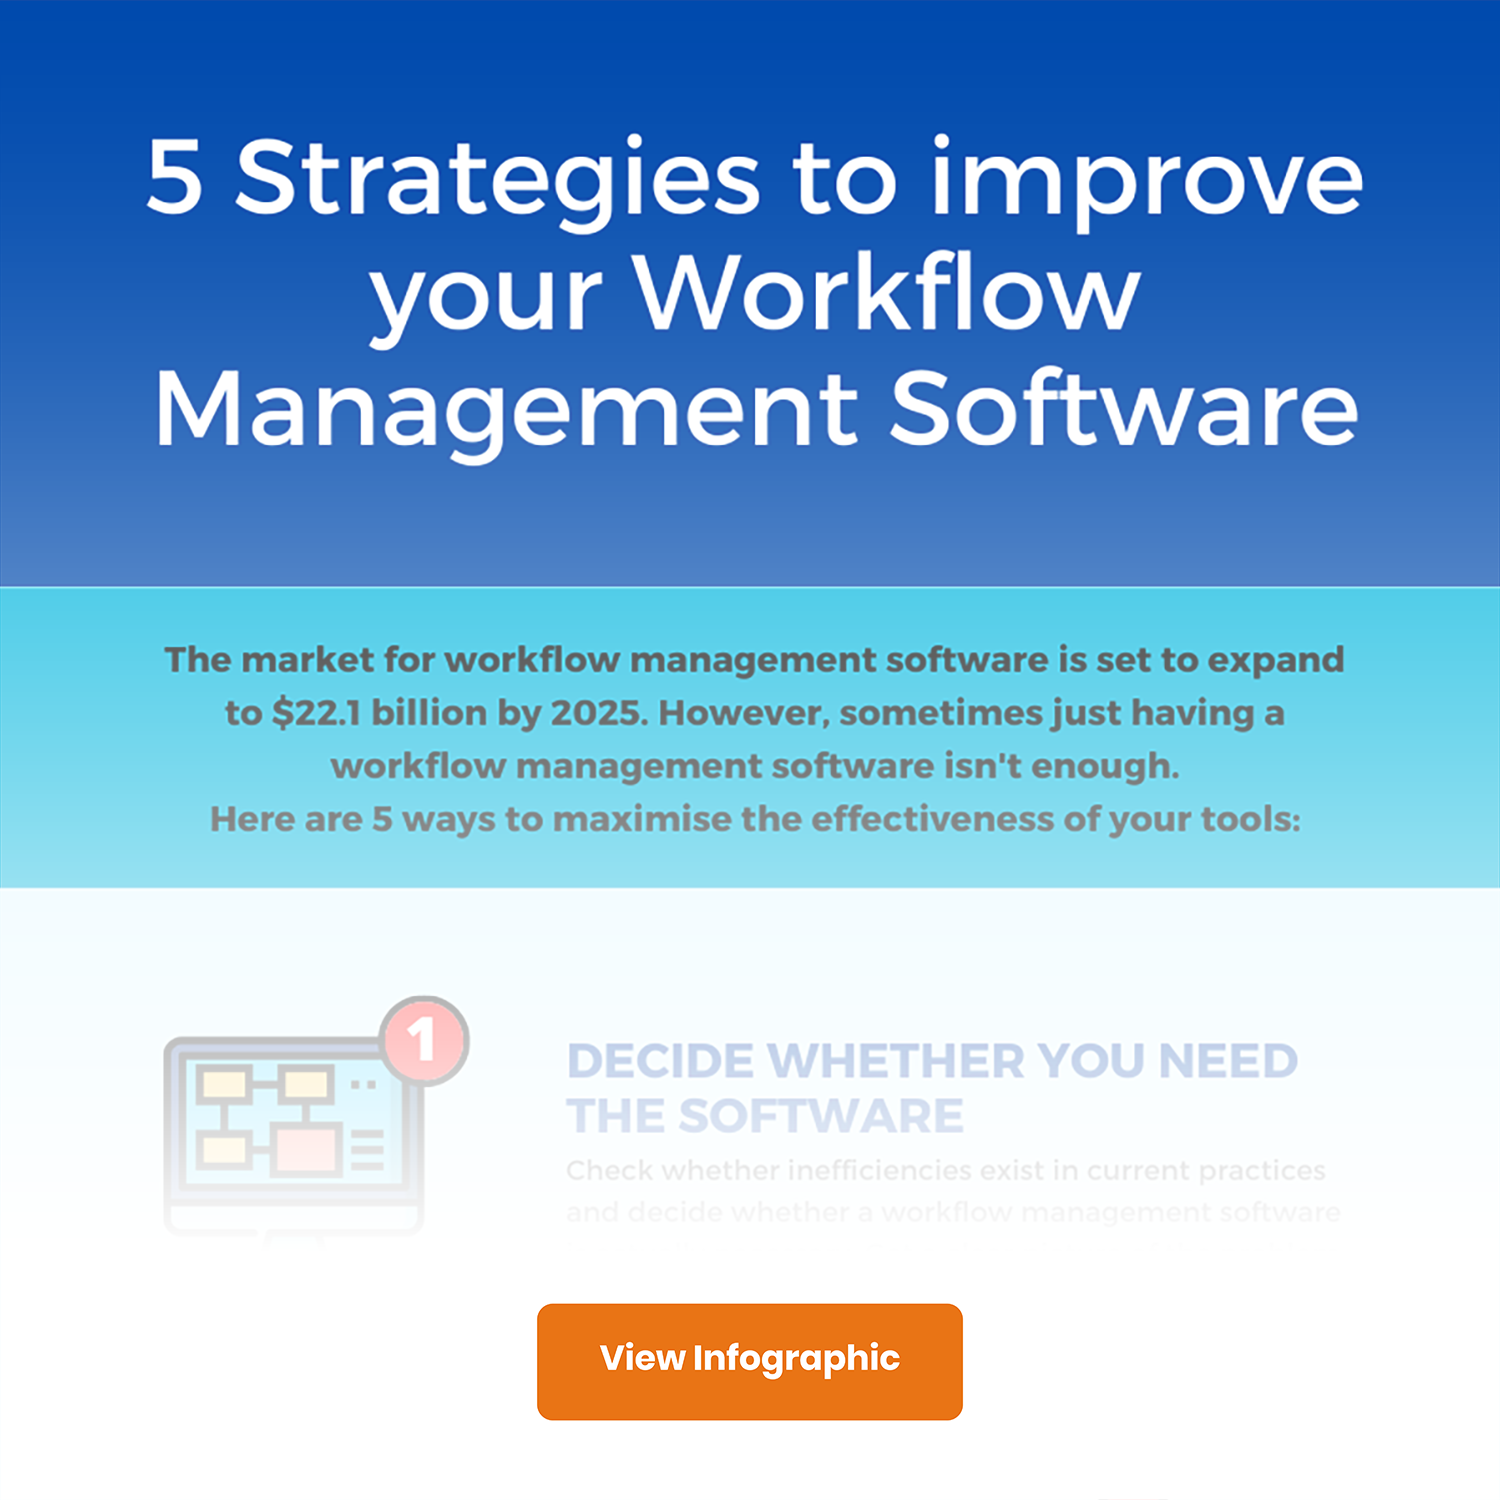 5 Strategies to improve your Workflow Management Software-Infographic